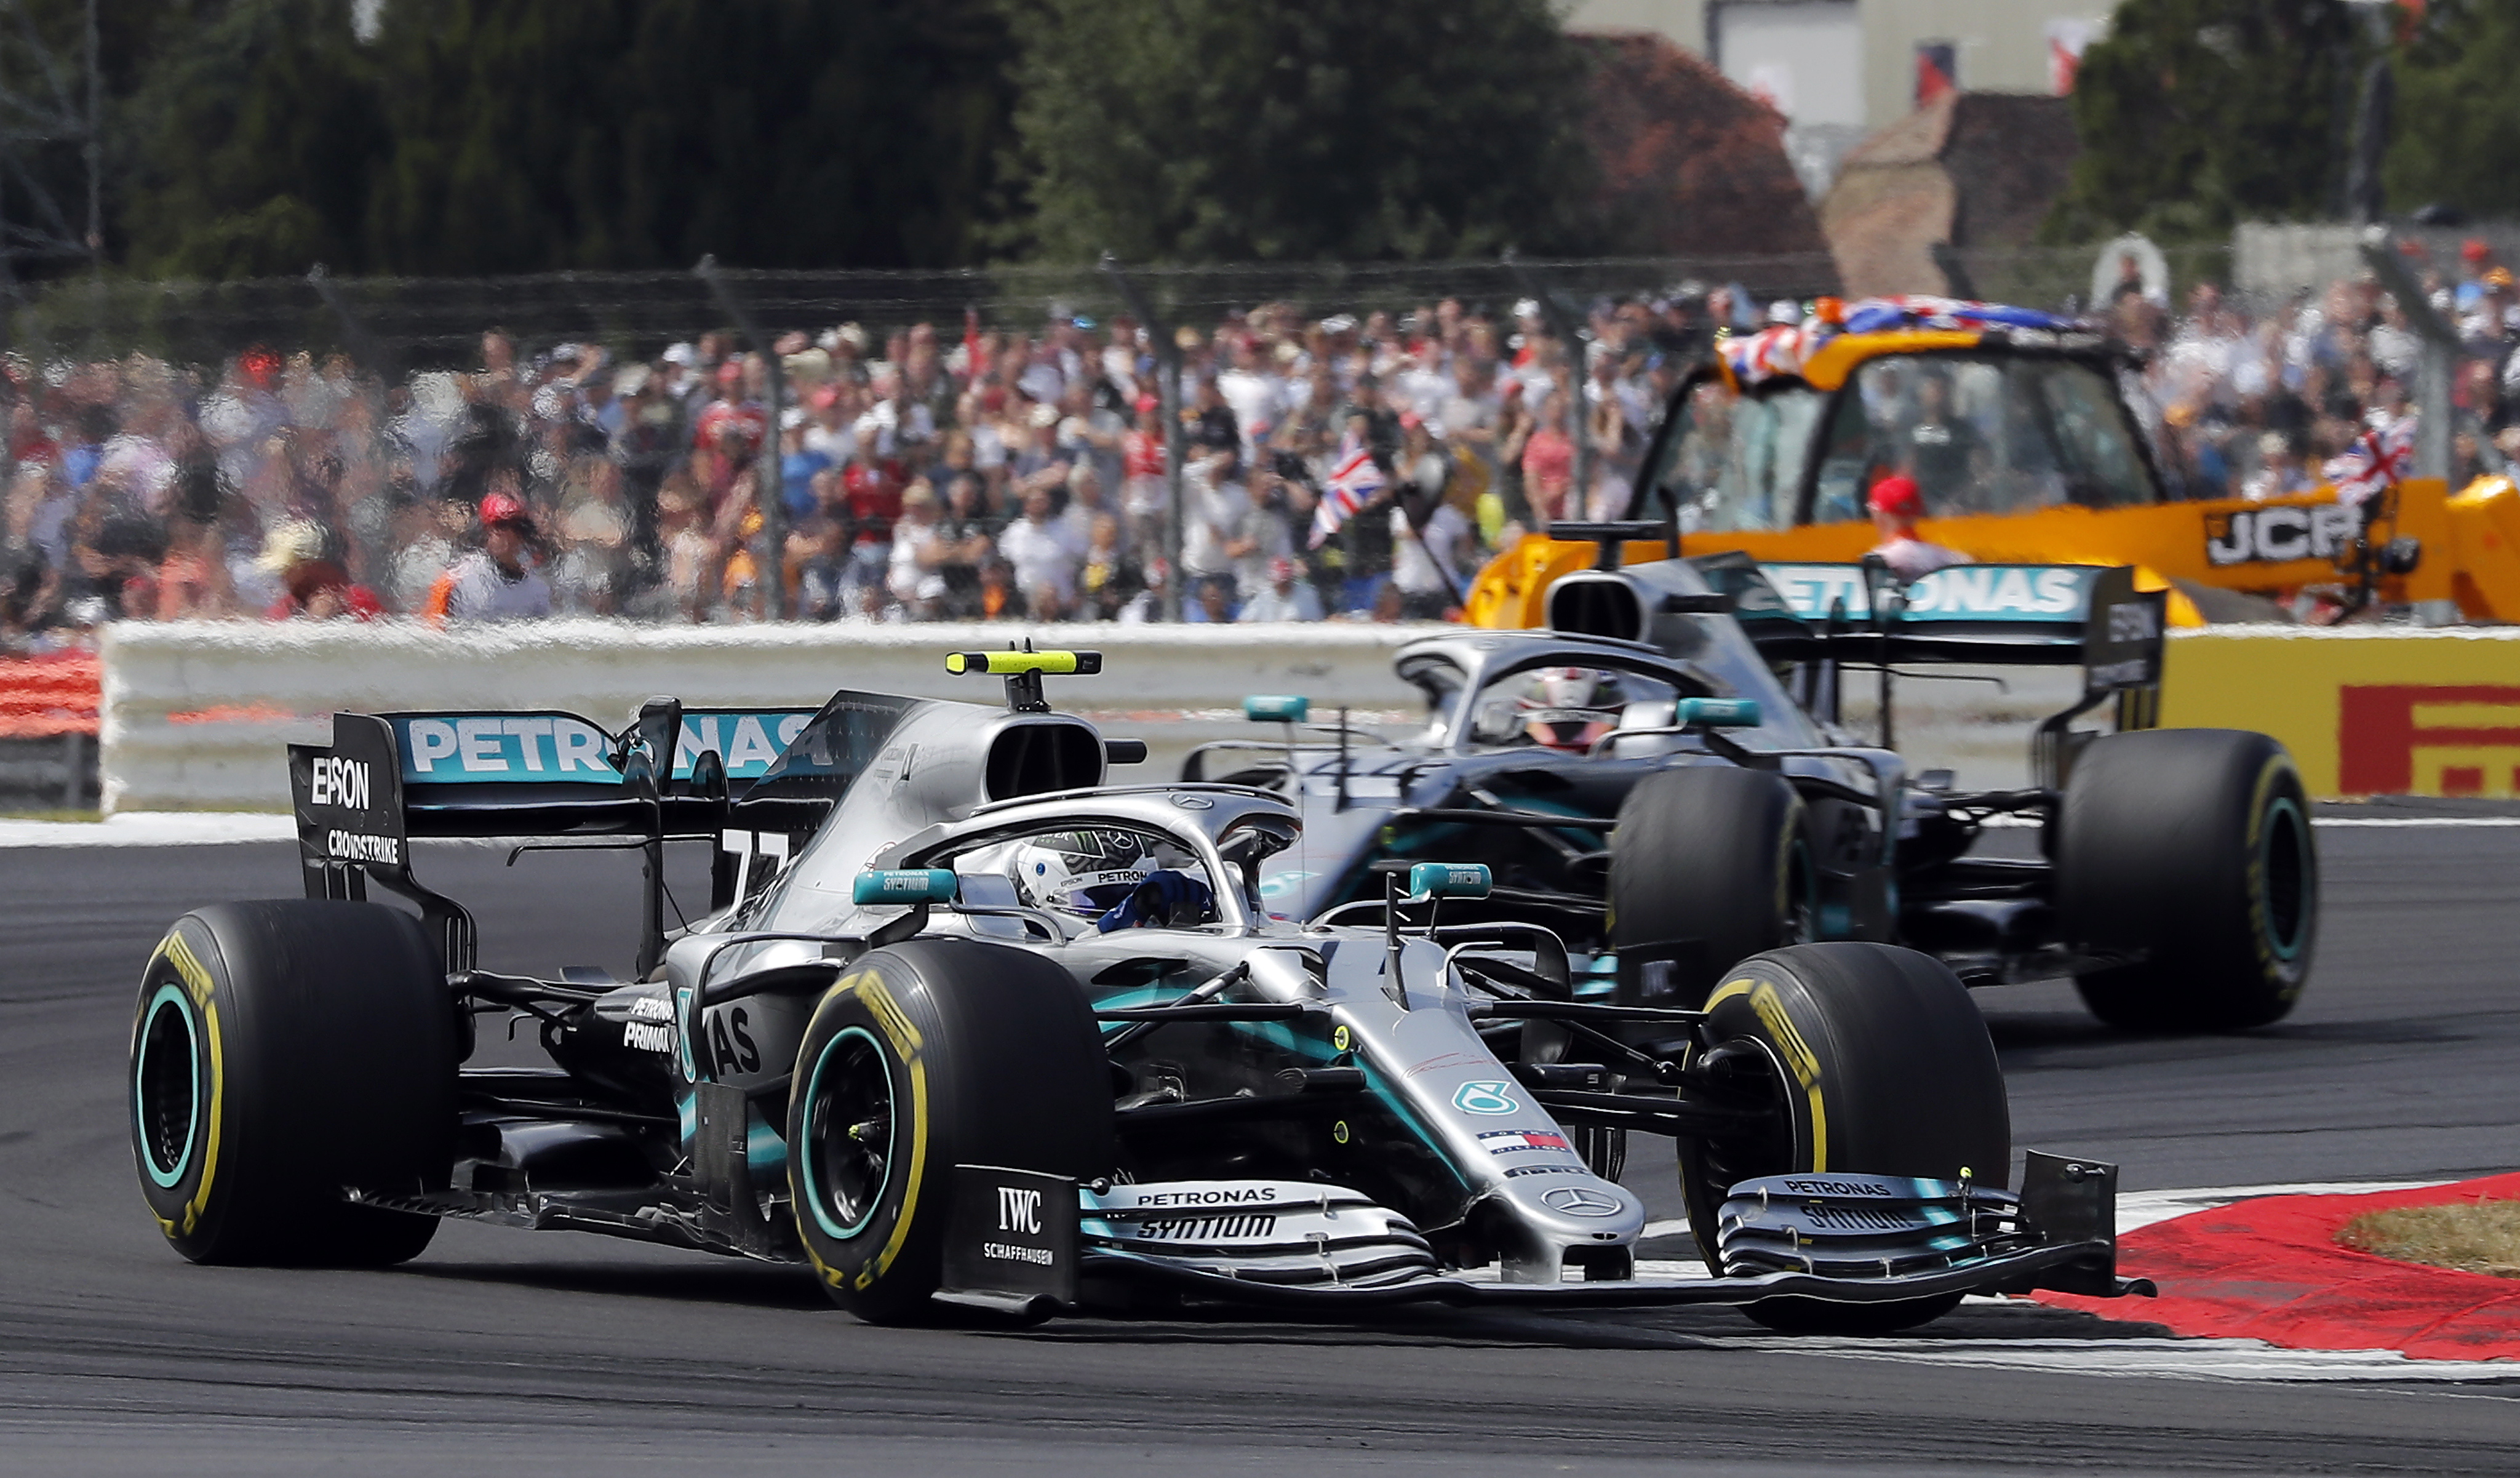 epa07716597 Finnish Formula One driver Valtteri Bottas (front) of Mercedes AMG GP and British Formula One driver Lewis Hamilton (back) of Mercedes AMG GP in action during the 2019 Formula One Grand Prix at the Silverstone Circuit, in Northamptonshire, Britain, 14 July 2019.  EPA/VALDRIN XHEMAJ